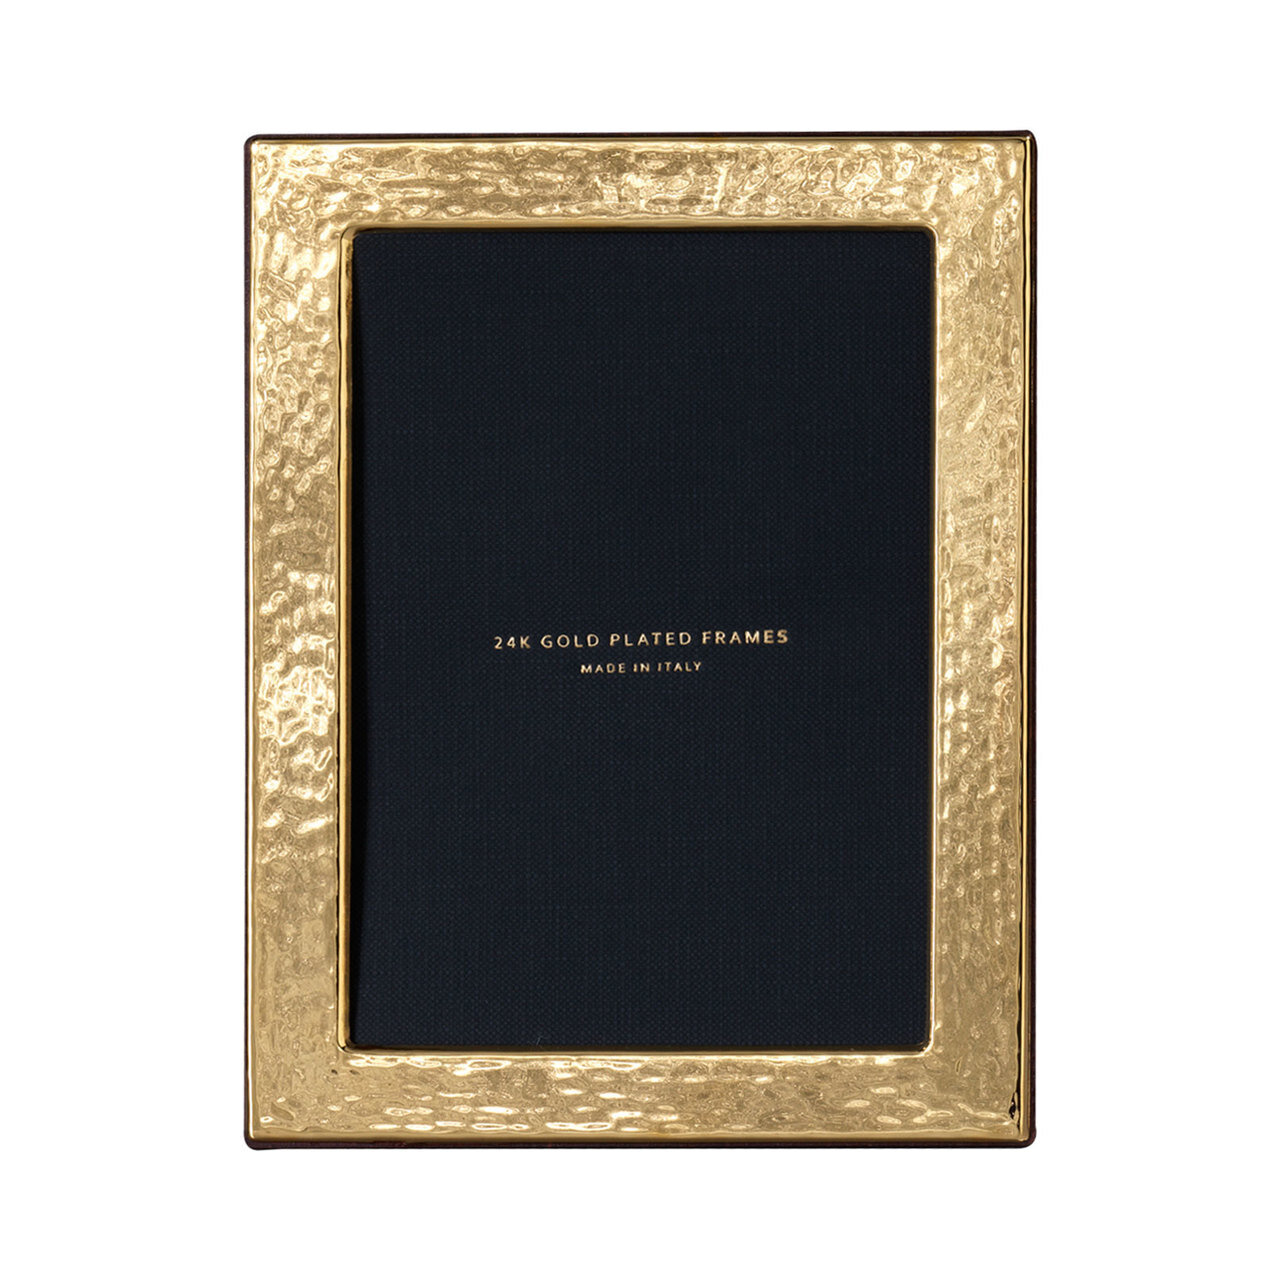 Cunill Hammered 4 x 6 Inch Picture Frame - 24k Gold Plated 0.5 Microns